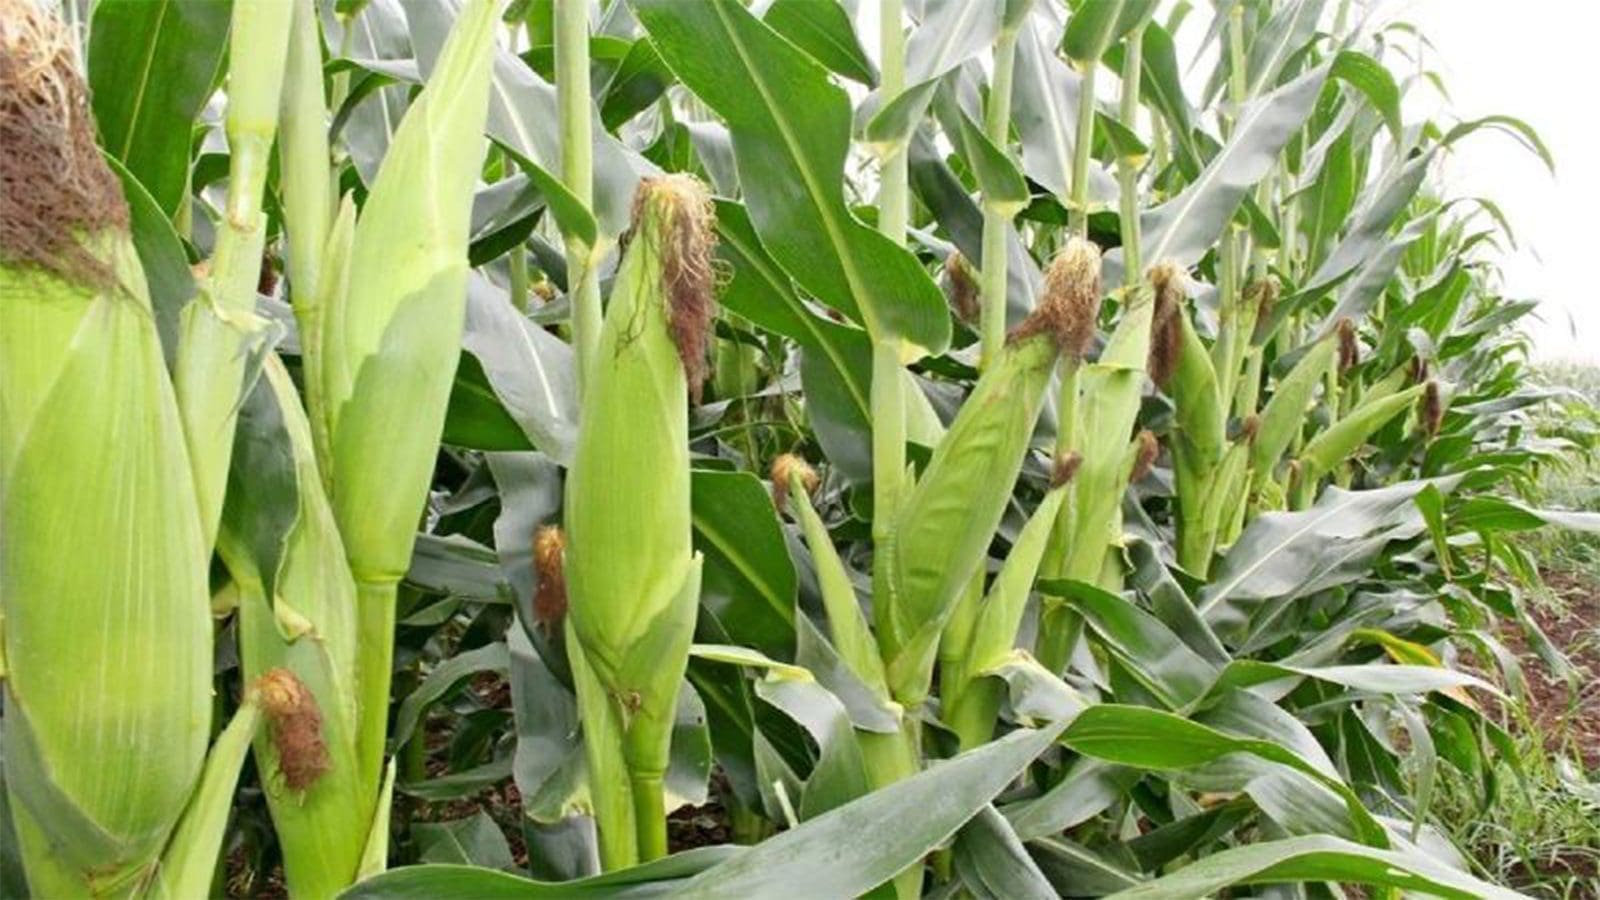 Advans Côte d’Ivoire partners AFD in US$245,000 deal to finance maize producers’ access to inputs